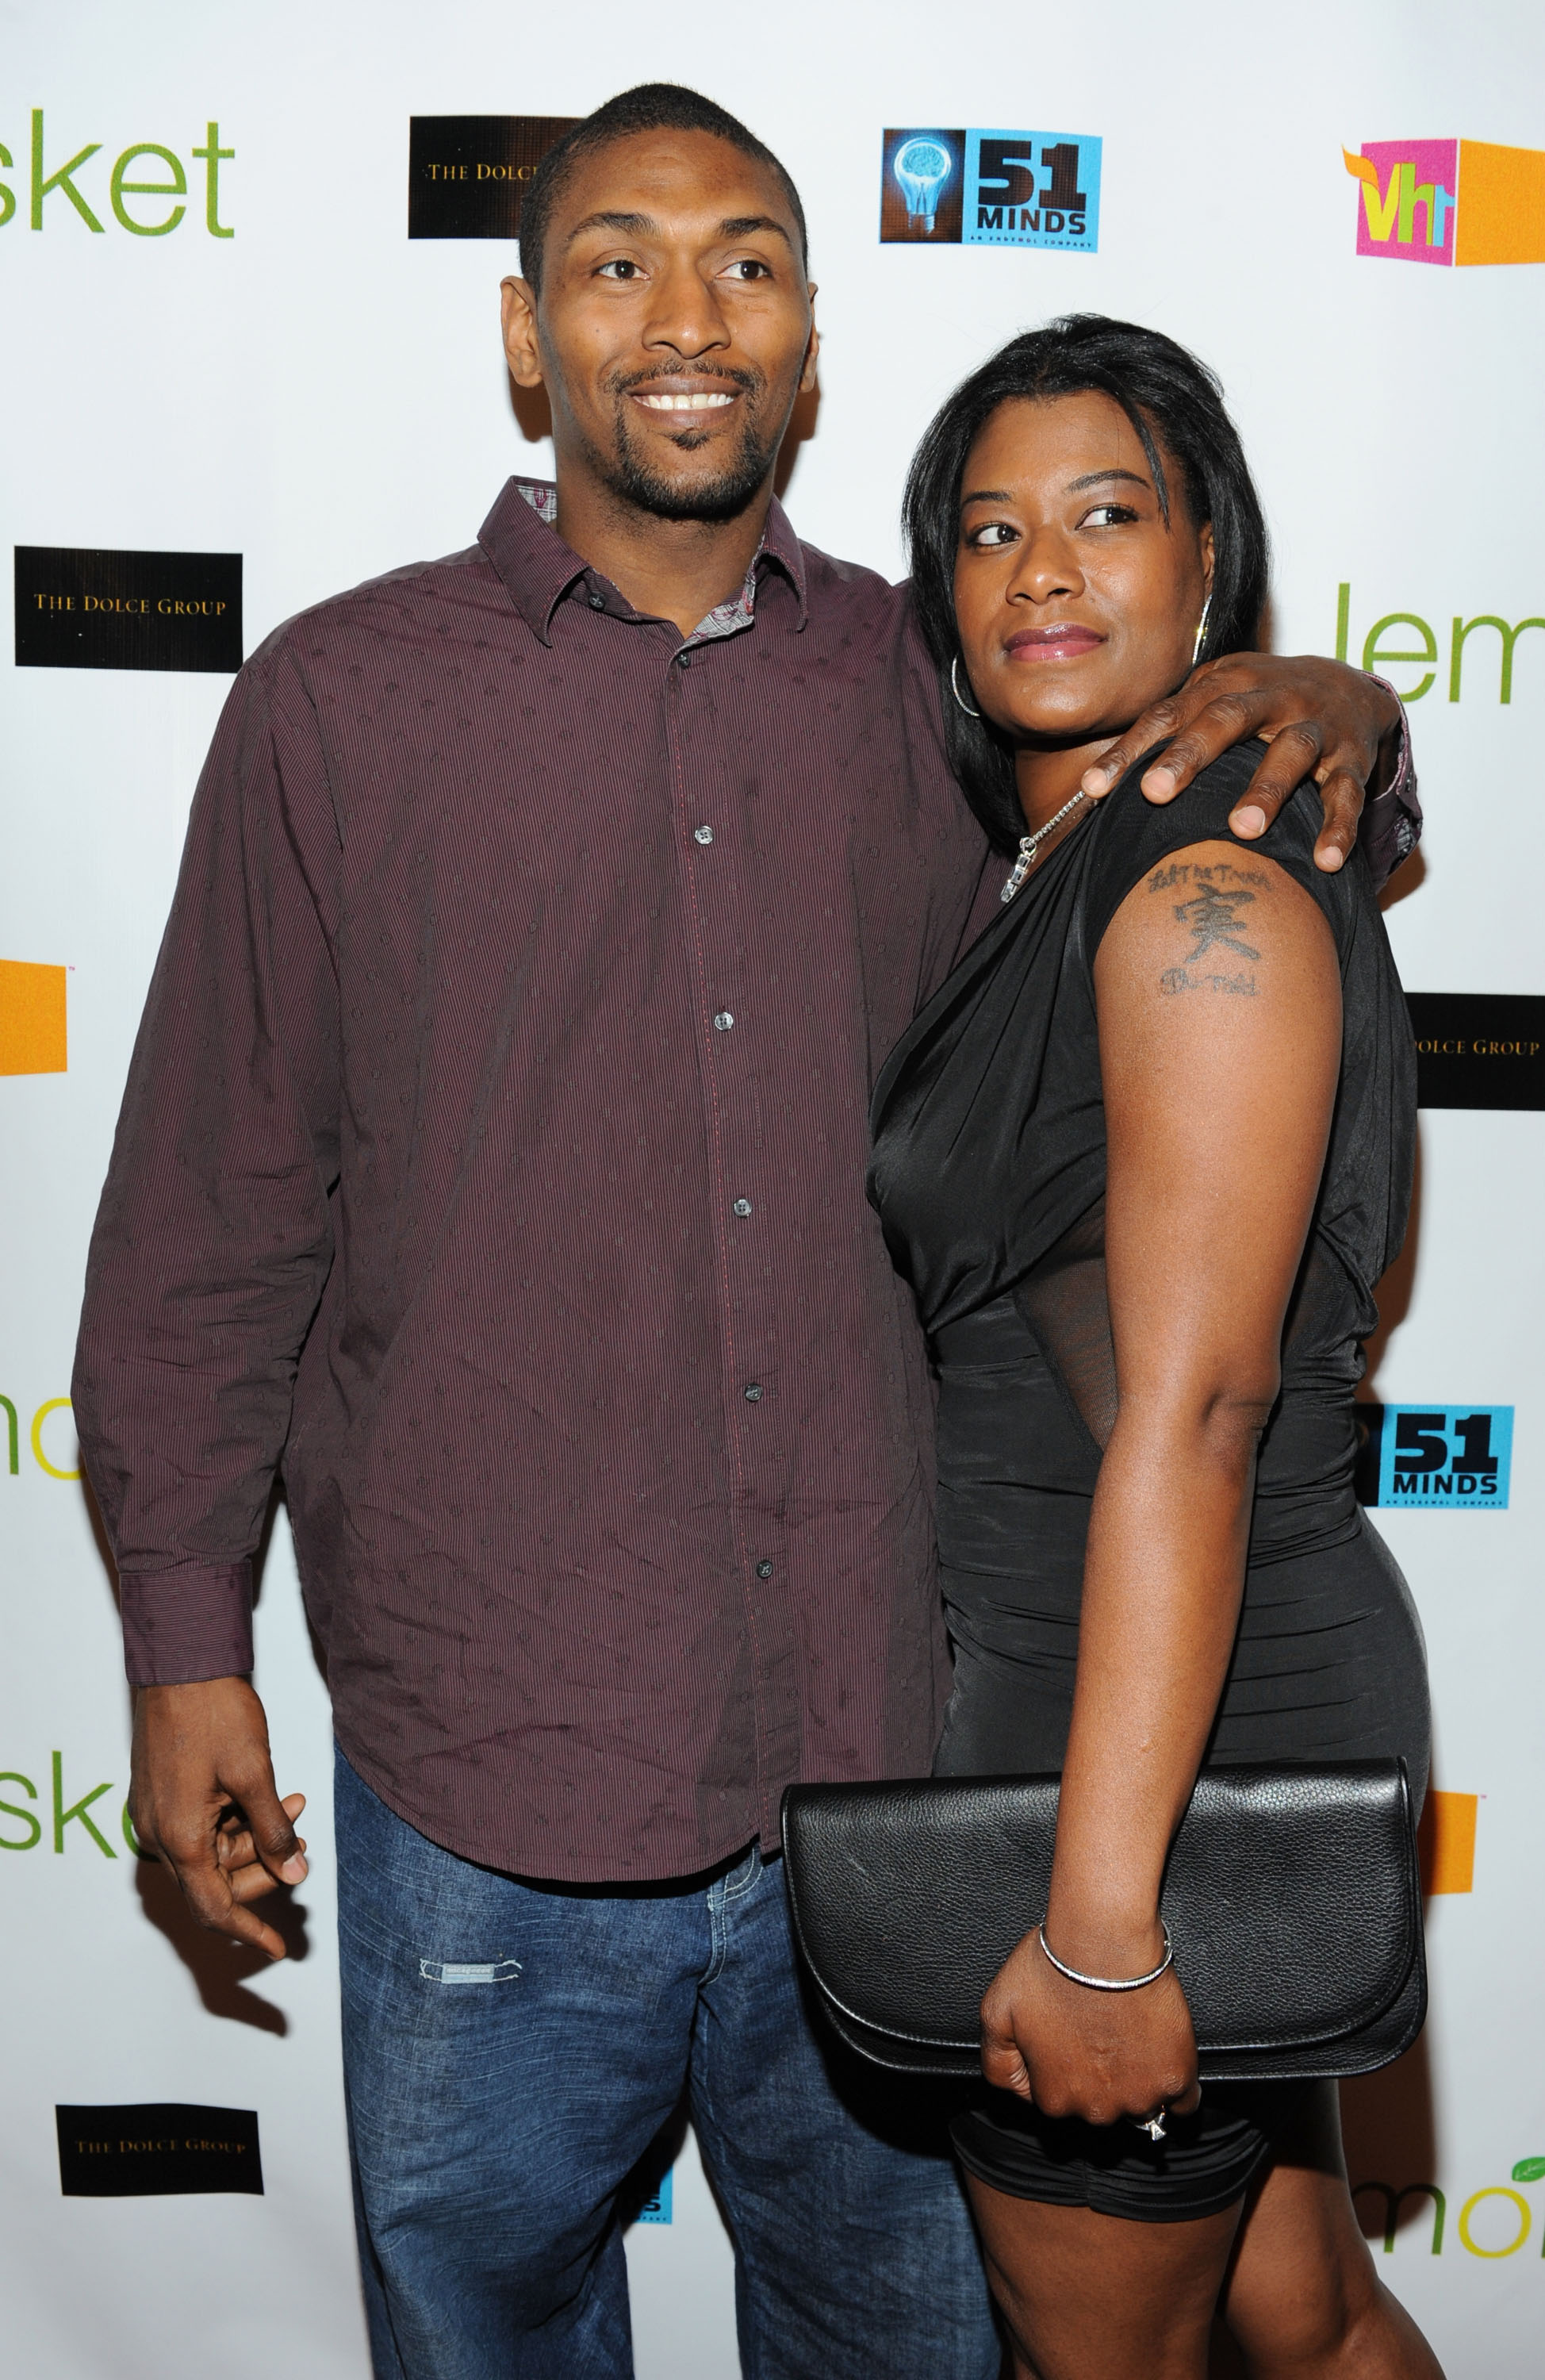 Metta World Peace and Kimsha Artest arrive at the grand opening of Lemon Basket restaurant on May 11, 2011, in West Hollywood, California. | Source: Getty Images